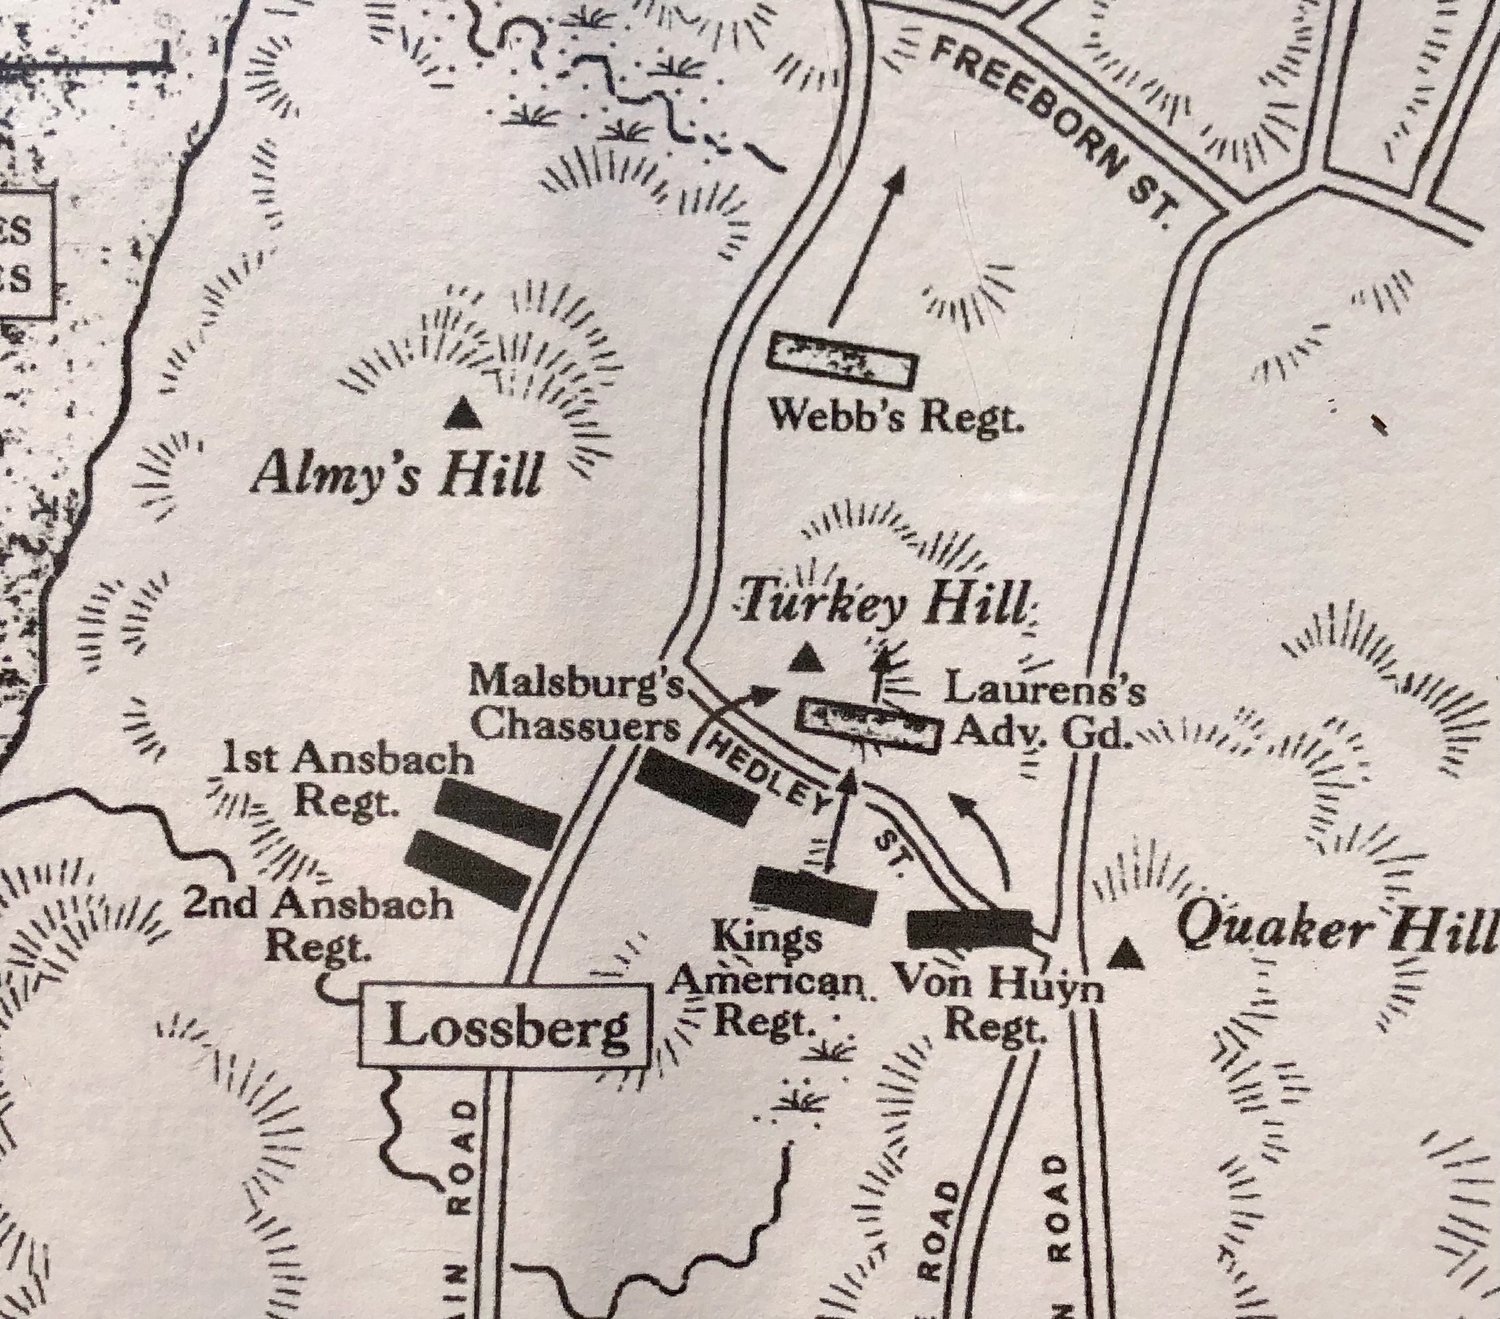 One of the stations featured a map showing 1778 troop positions in relation to Turkey Hill, where Heritage Park is located. All maps were sourced from historian and author Christian McBurney, who has written extensively about Rhode Island’s part in the Revolutionary War.